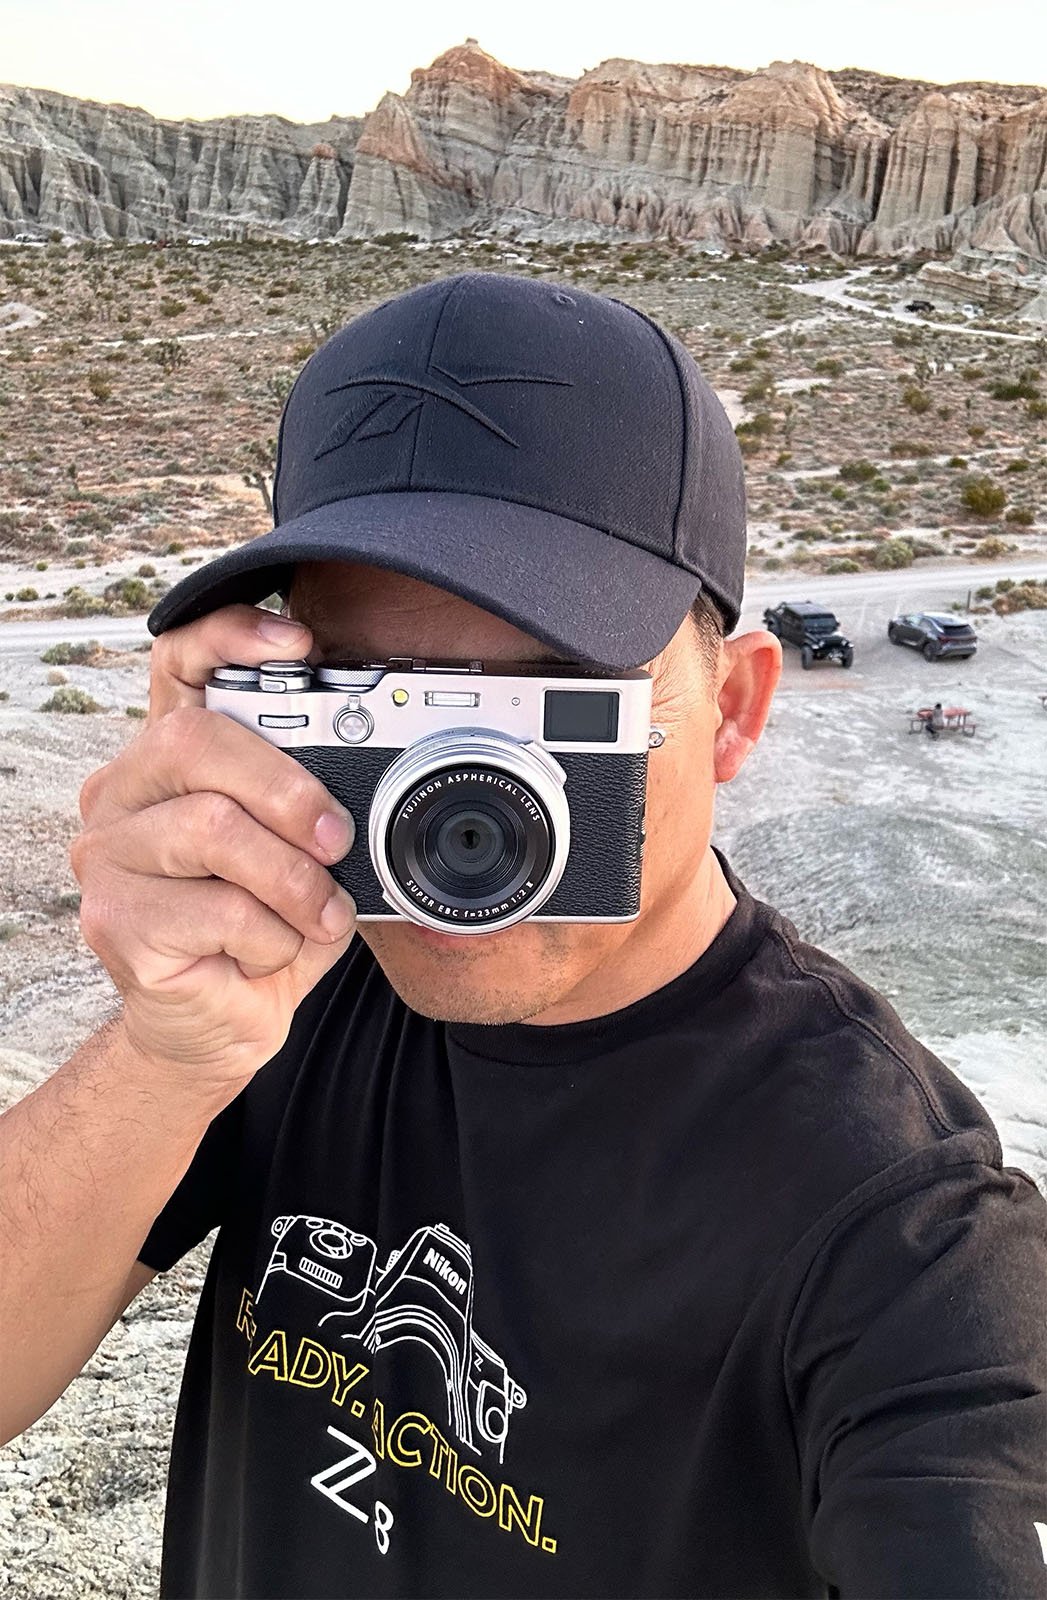 A person wearing a black cap and a black t-shirt with the text "READY. ACTION." is holding a camera up to their face while standing outdoors in a desert-like area with rocky formations and parked vehicles in the background.